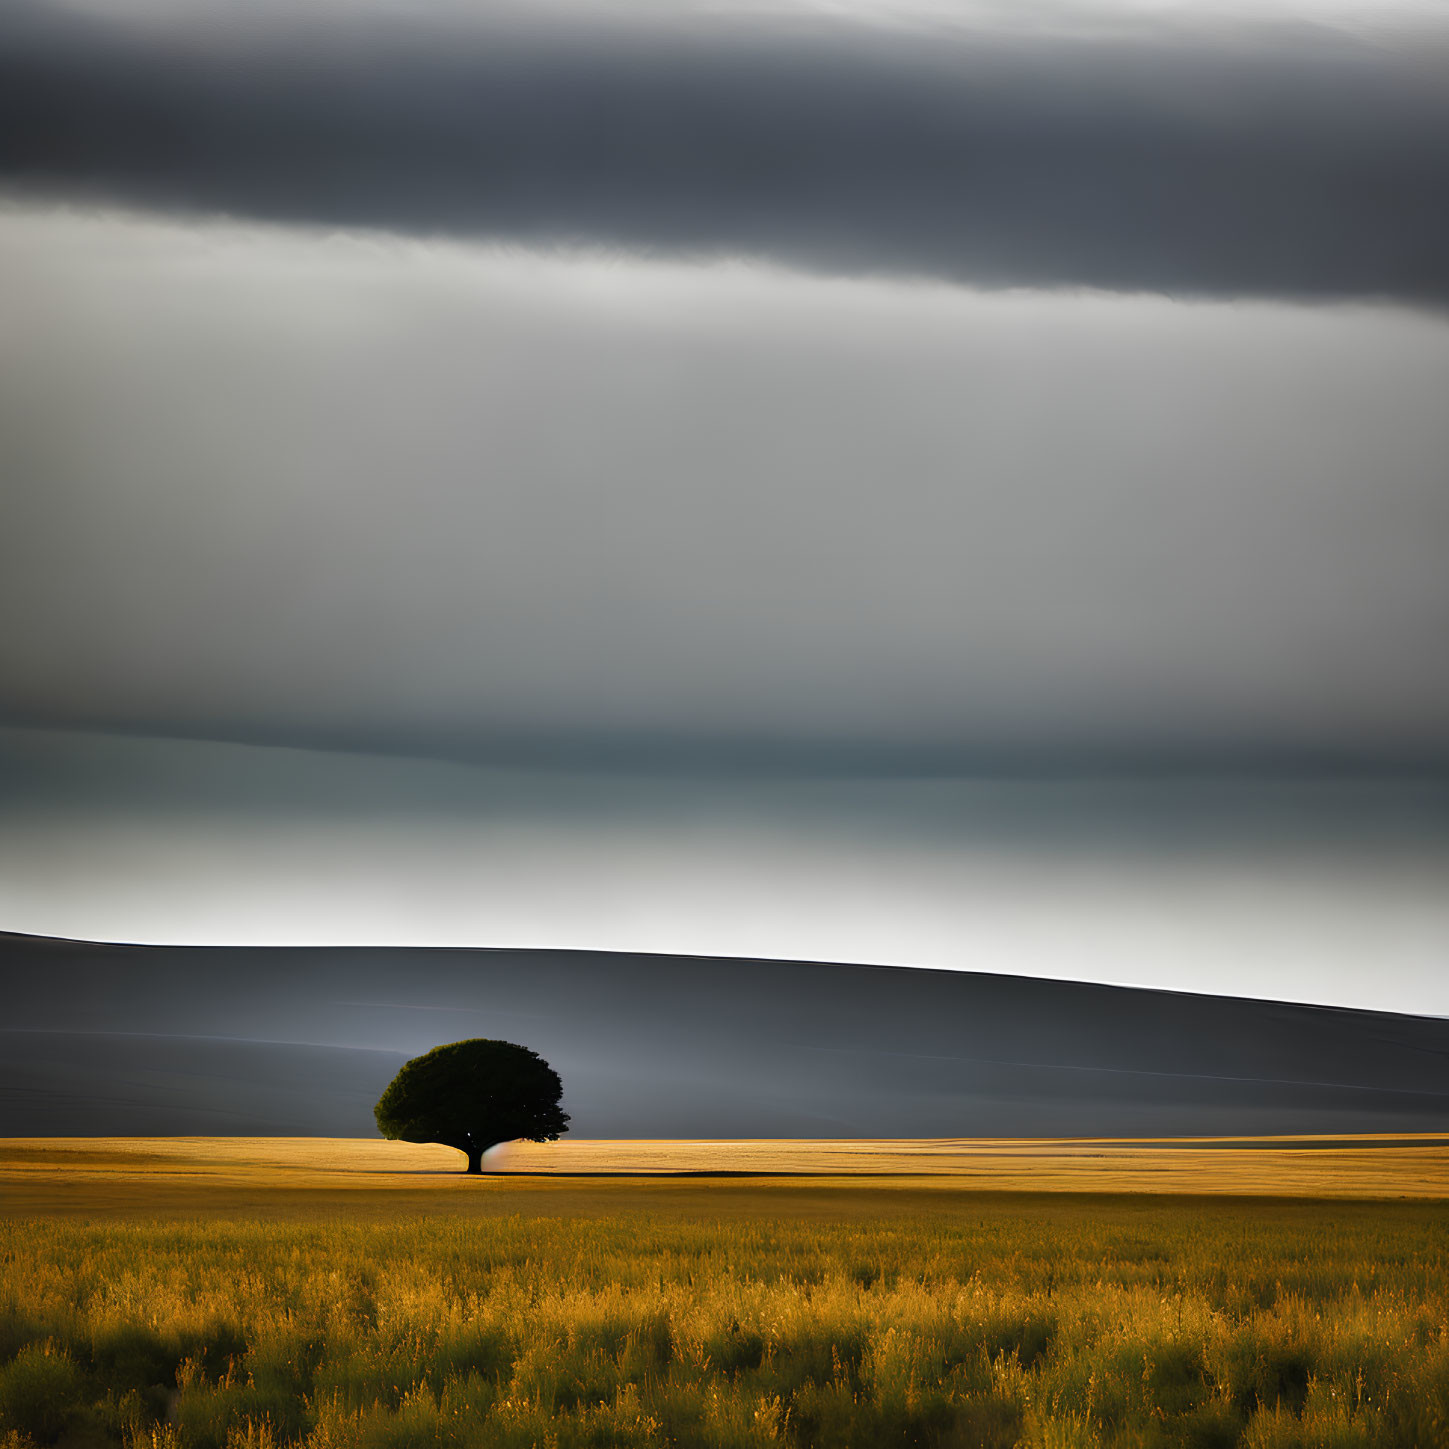 Solitary Tree in Golden Field Under Dramatic Sky